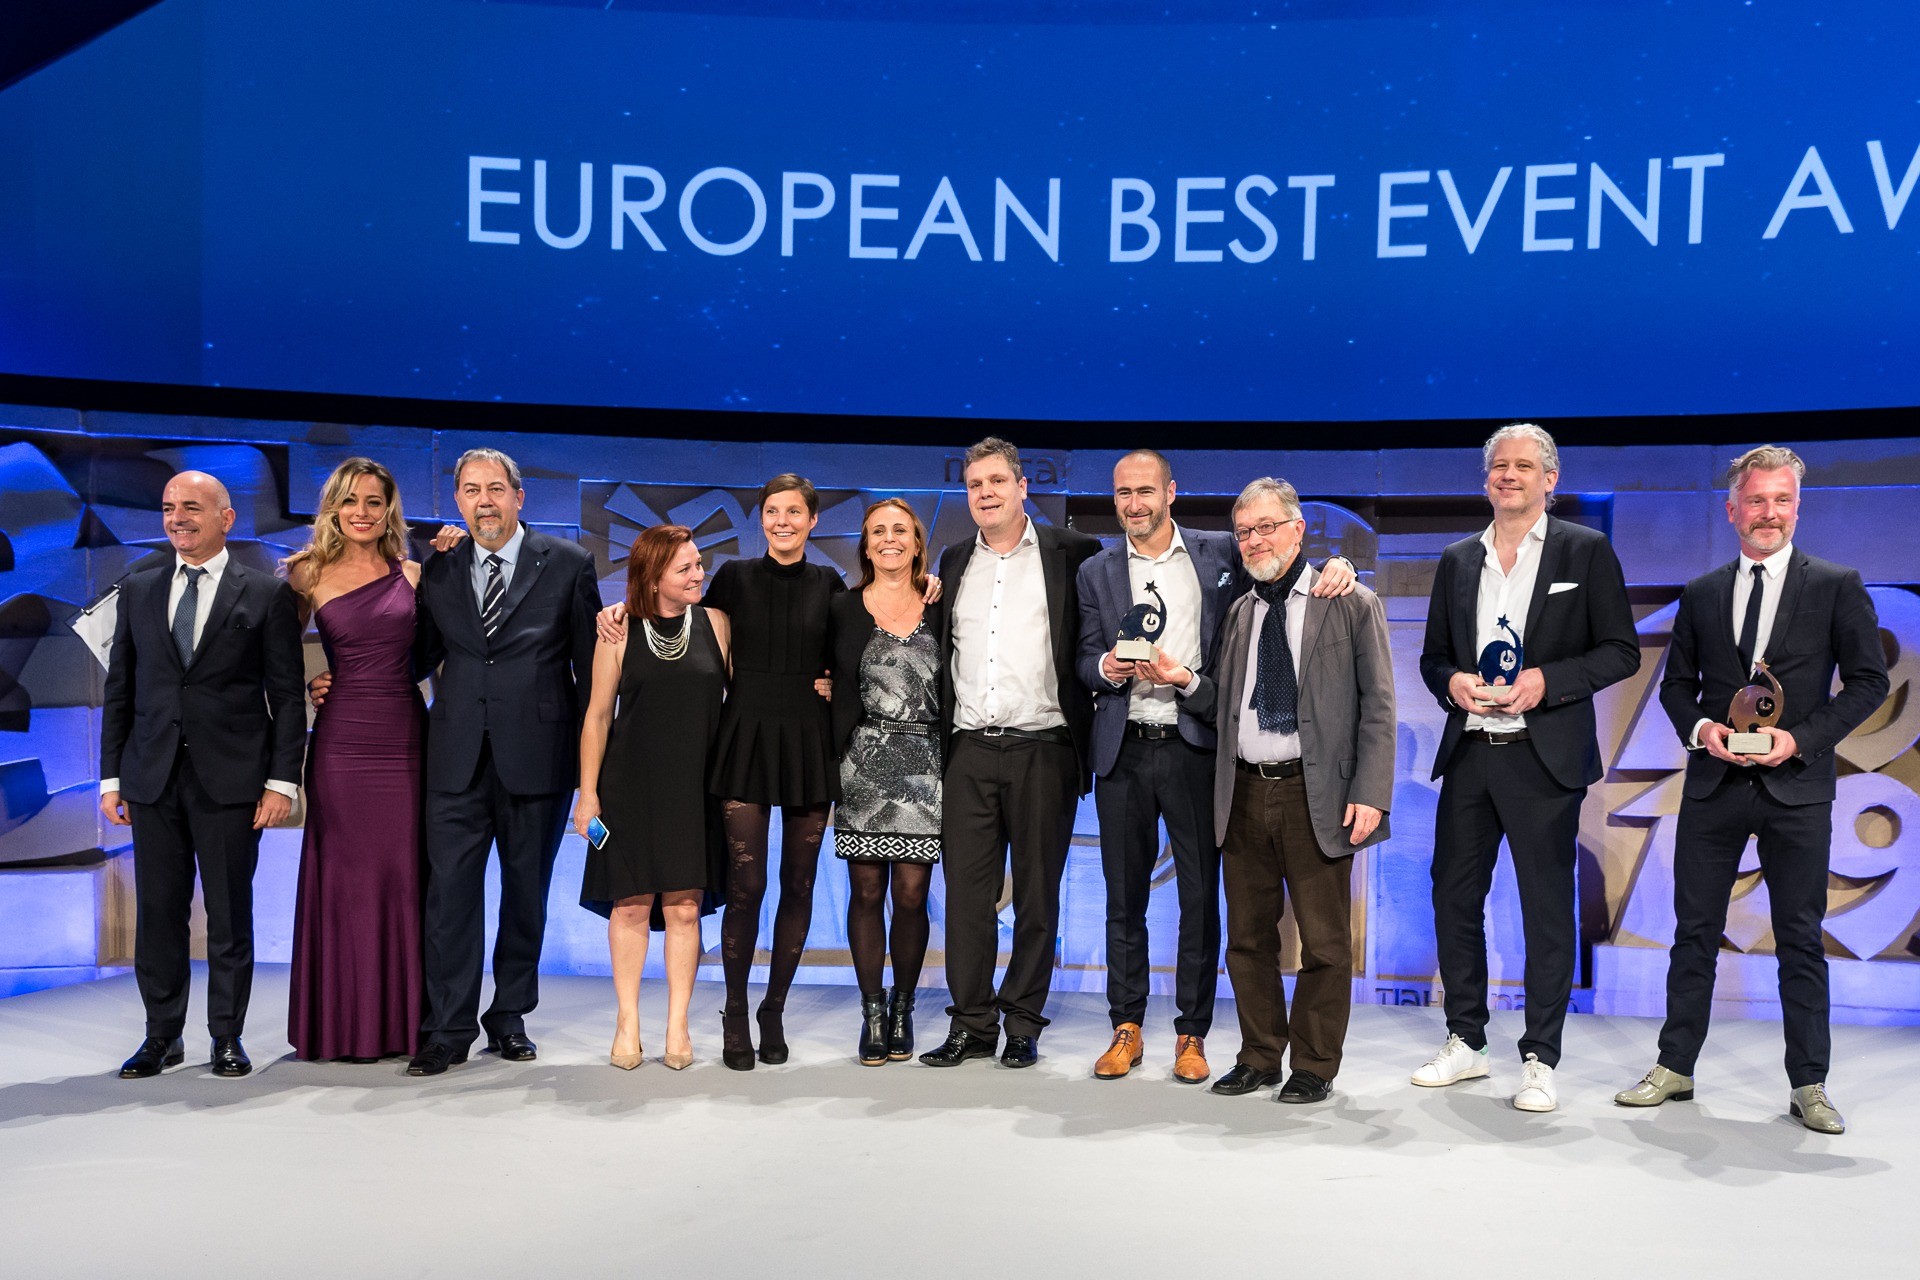 Discover the winners of the European Best Event Award